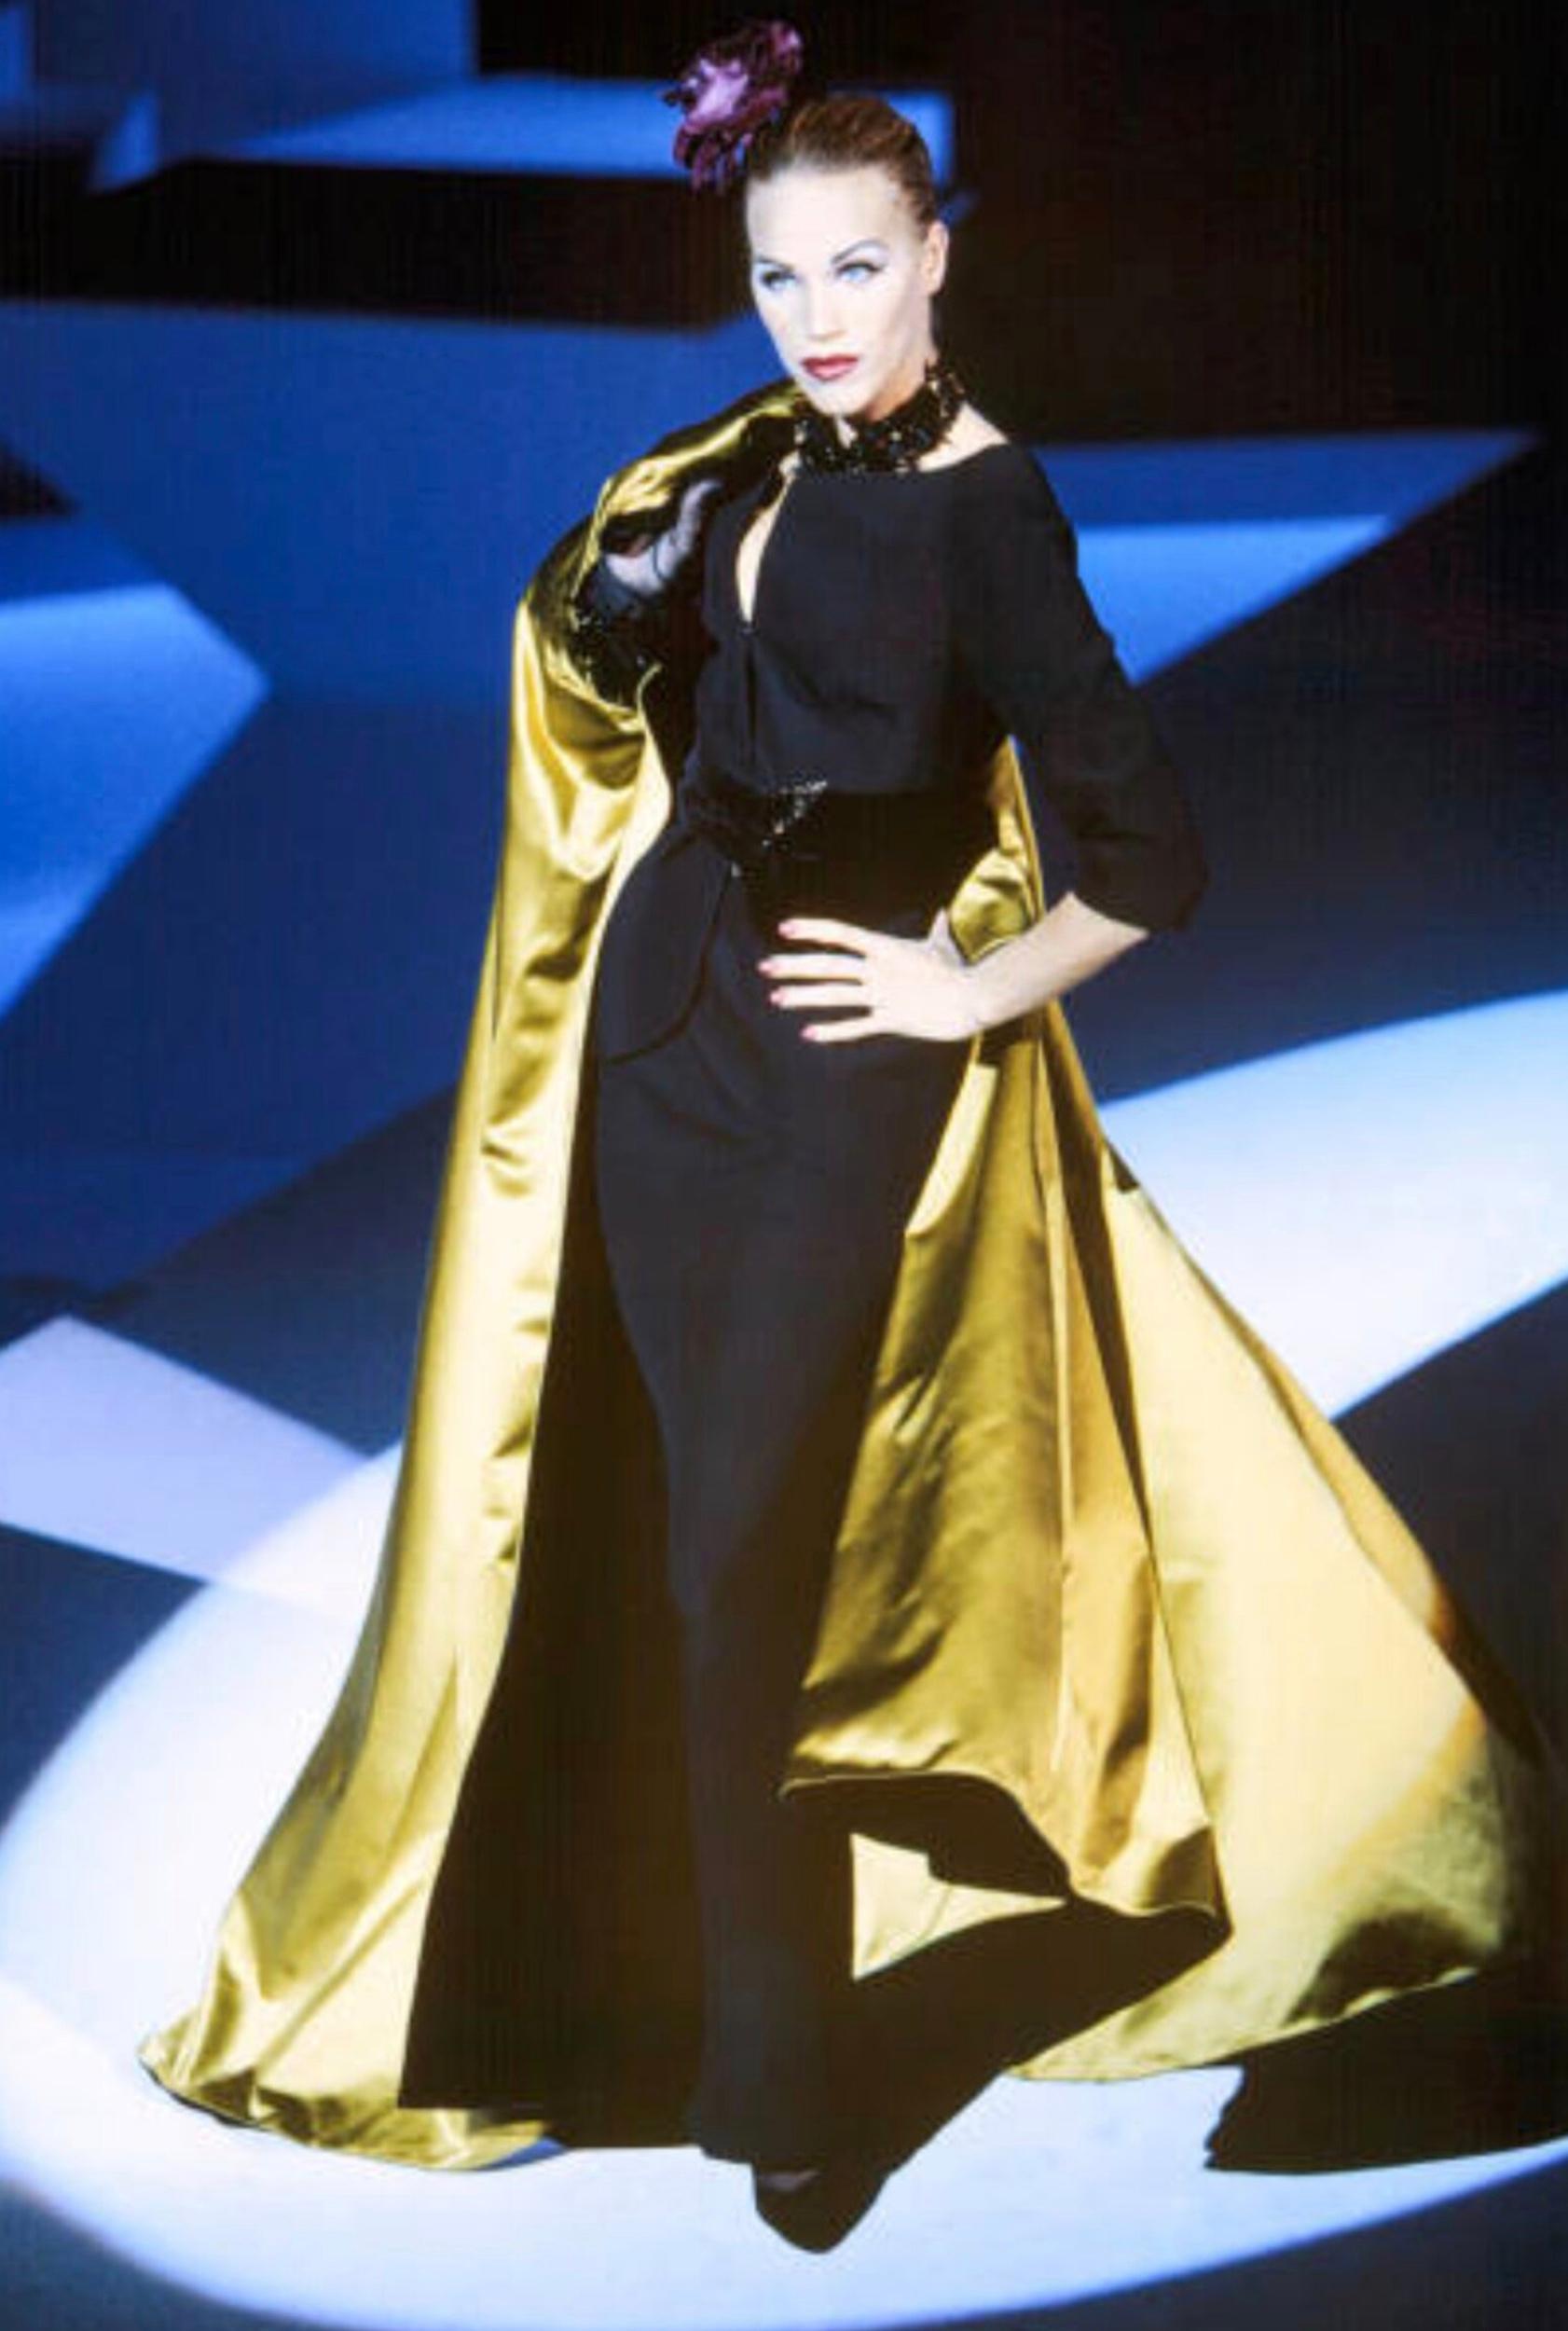 
Iconic Thierry Mugler Piece
Fabulously presented by Emma Sojberg on the legendary FW1995-96 Fashionshow!
Black elegant blazer with gorgeous neckline! Attached dramatic velvet sash belt at the waist. Highlight is the belt buckle: bejeweled with